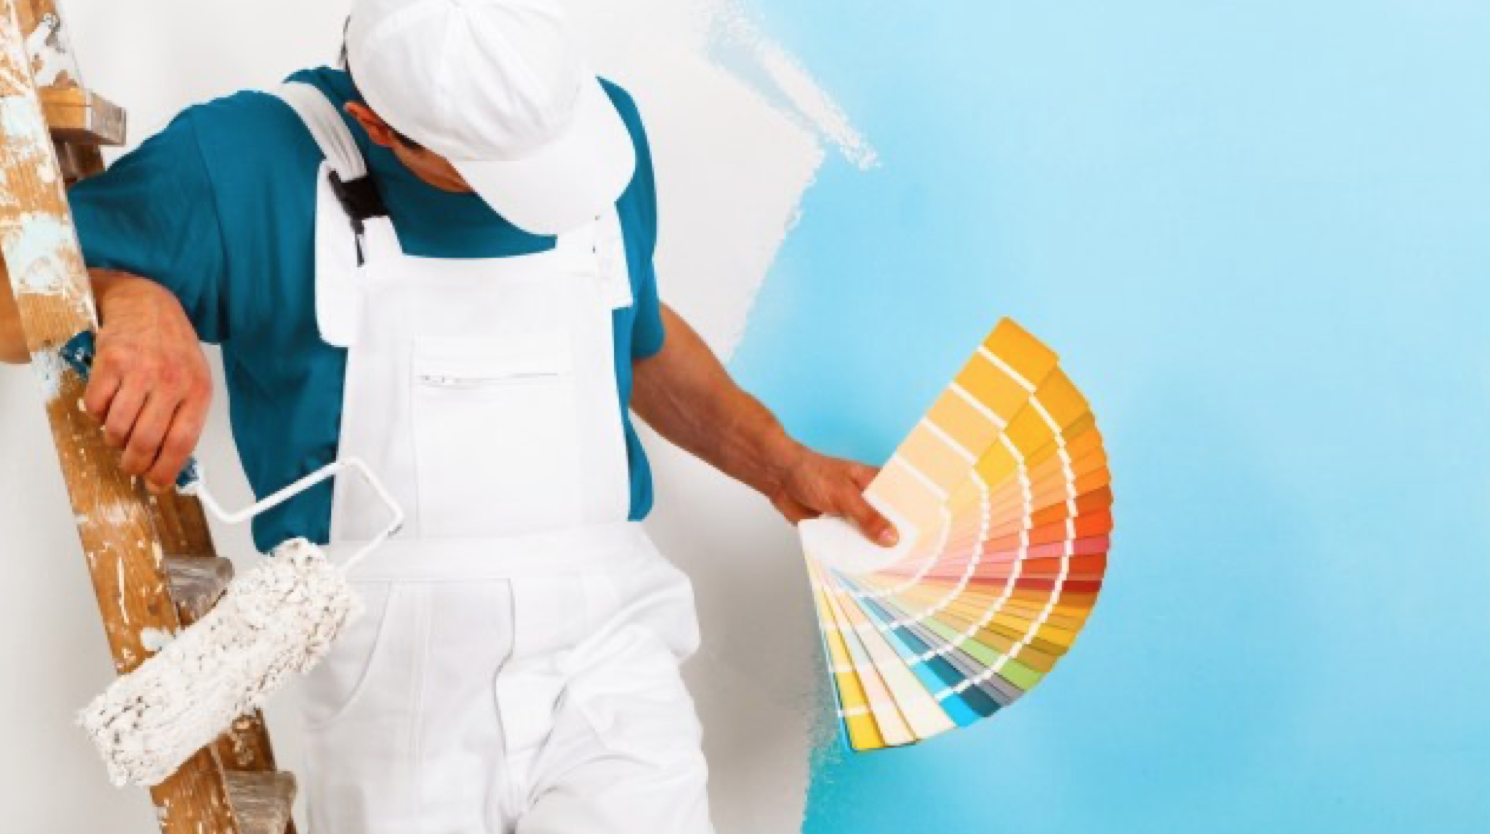 What Tools You Need to Paint Your Home